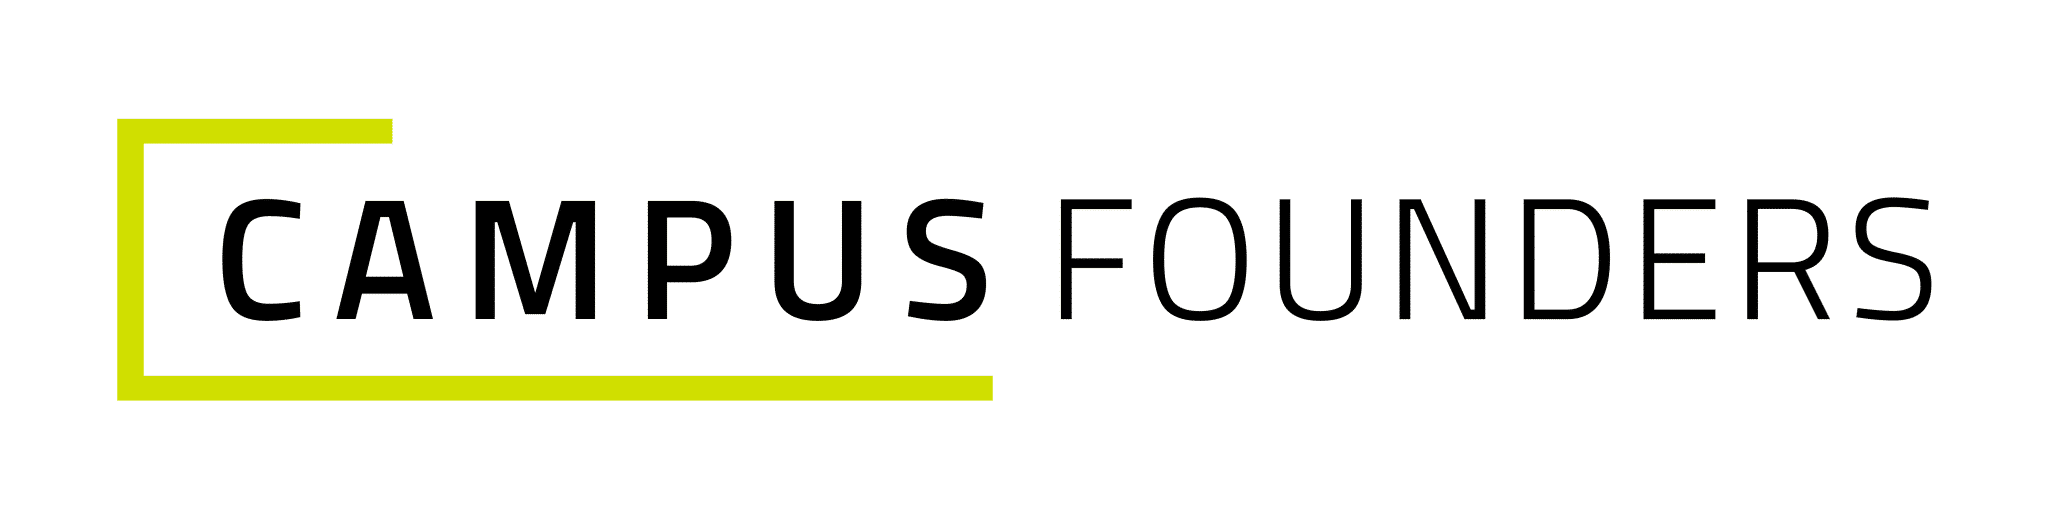 LOGO Campus Founders